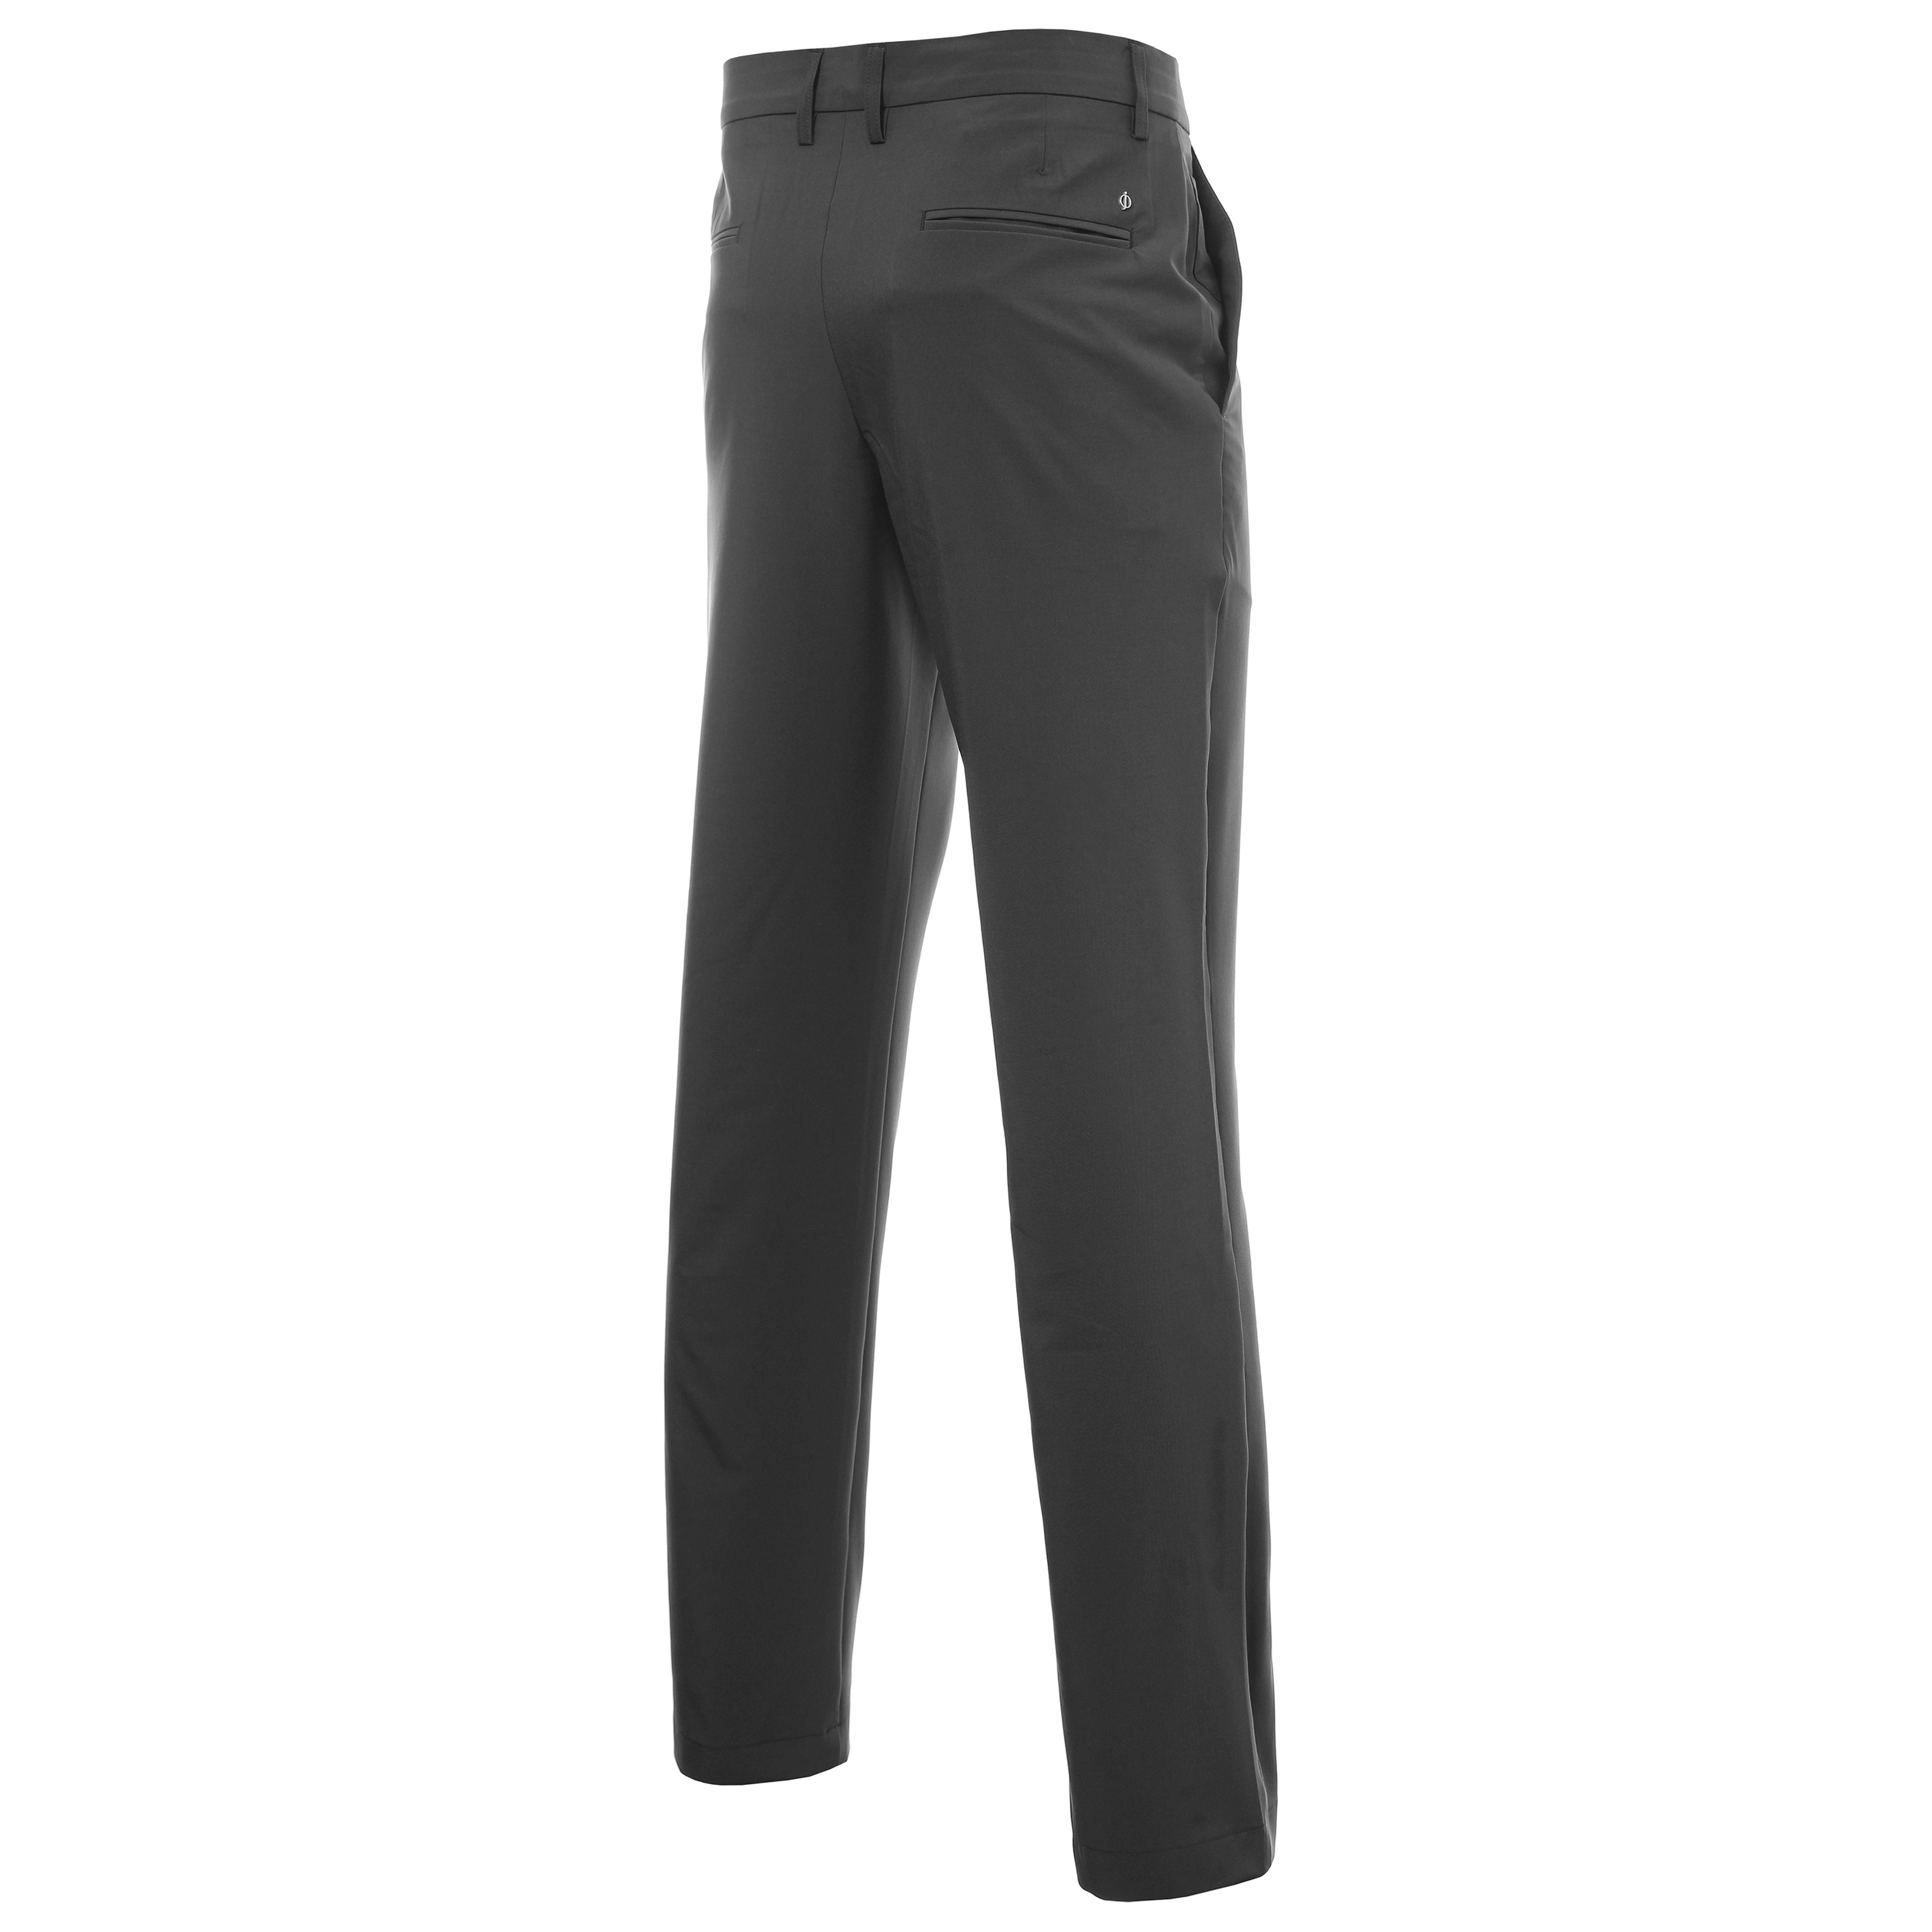 Oscar Jacobson Davenport Trousers OJTRS0005 Charcoal | Function18